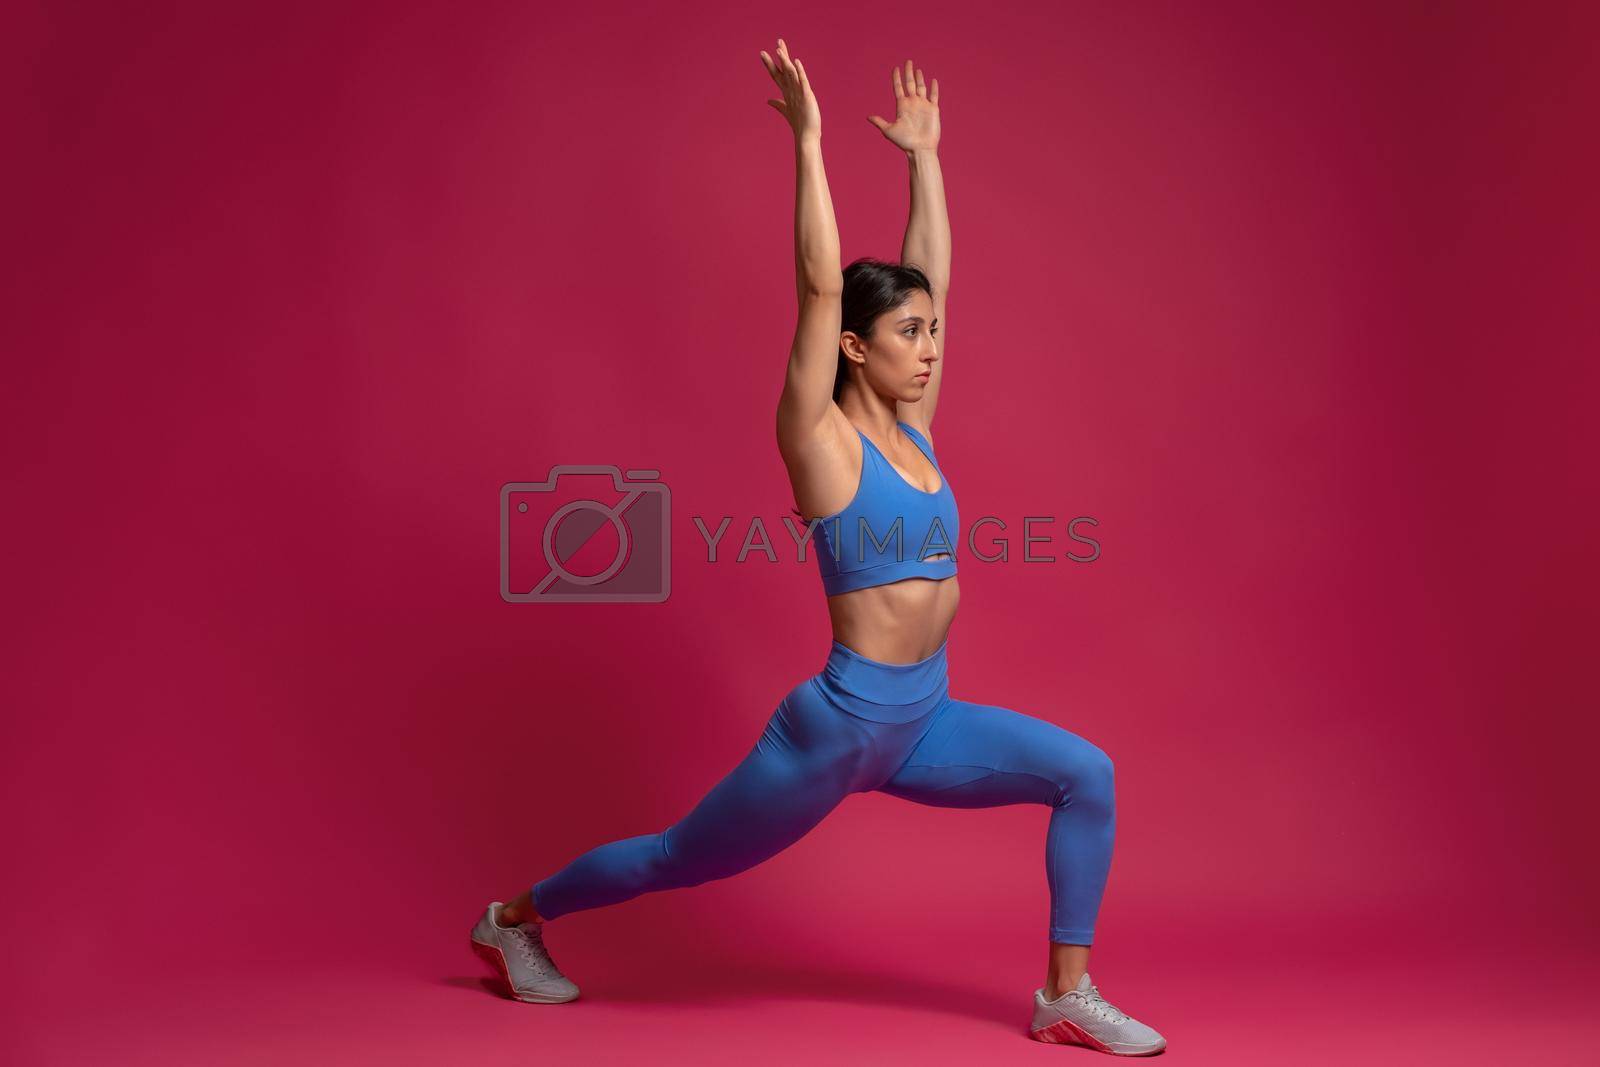 Sporty young woman performing Virabhadrasana, lunging standing asana with arms stretched straight upwards. Studio portrait on maroon background. Active lifestyle and yoga concept